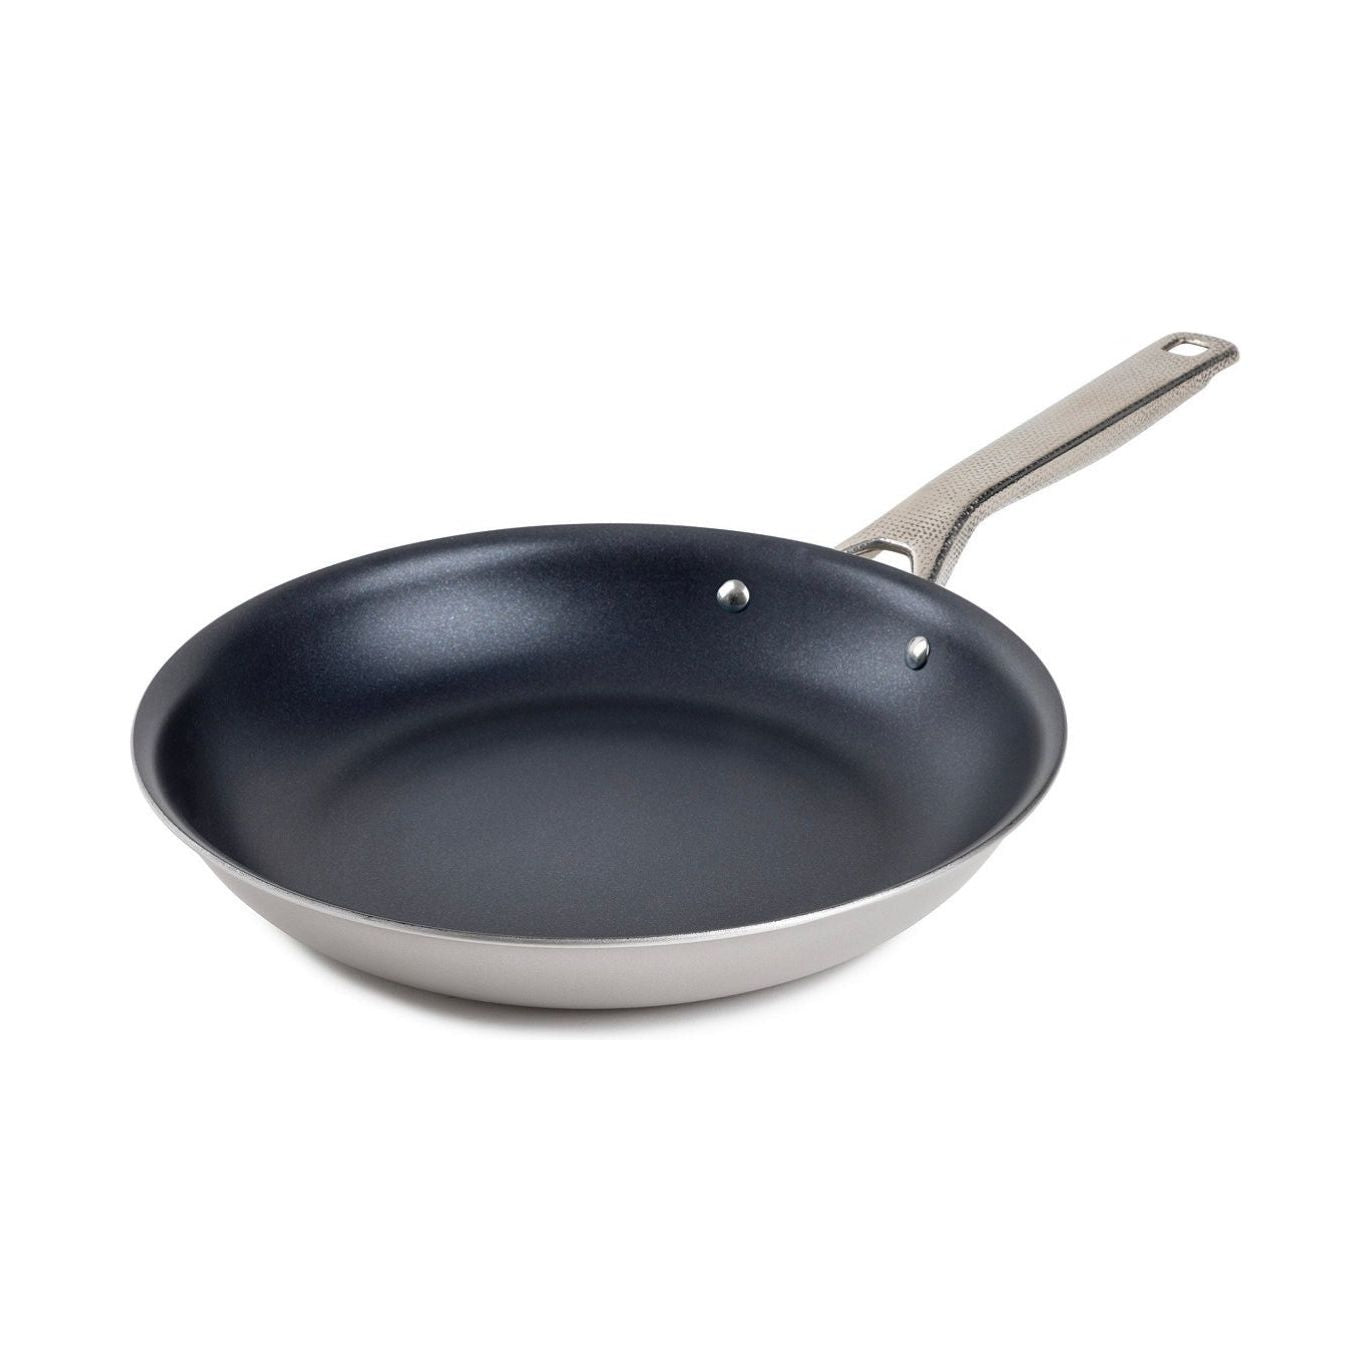 Brooklyn Steel Co.-Brooklyn Steel Co. Interstellar 12" Flared Sparkle Frypan with Hammered Handle (Charcoal) - Brandat Outlet